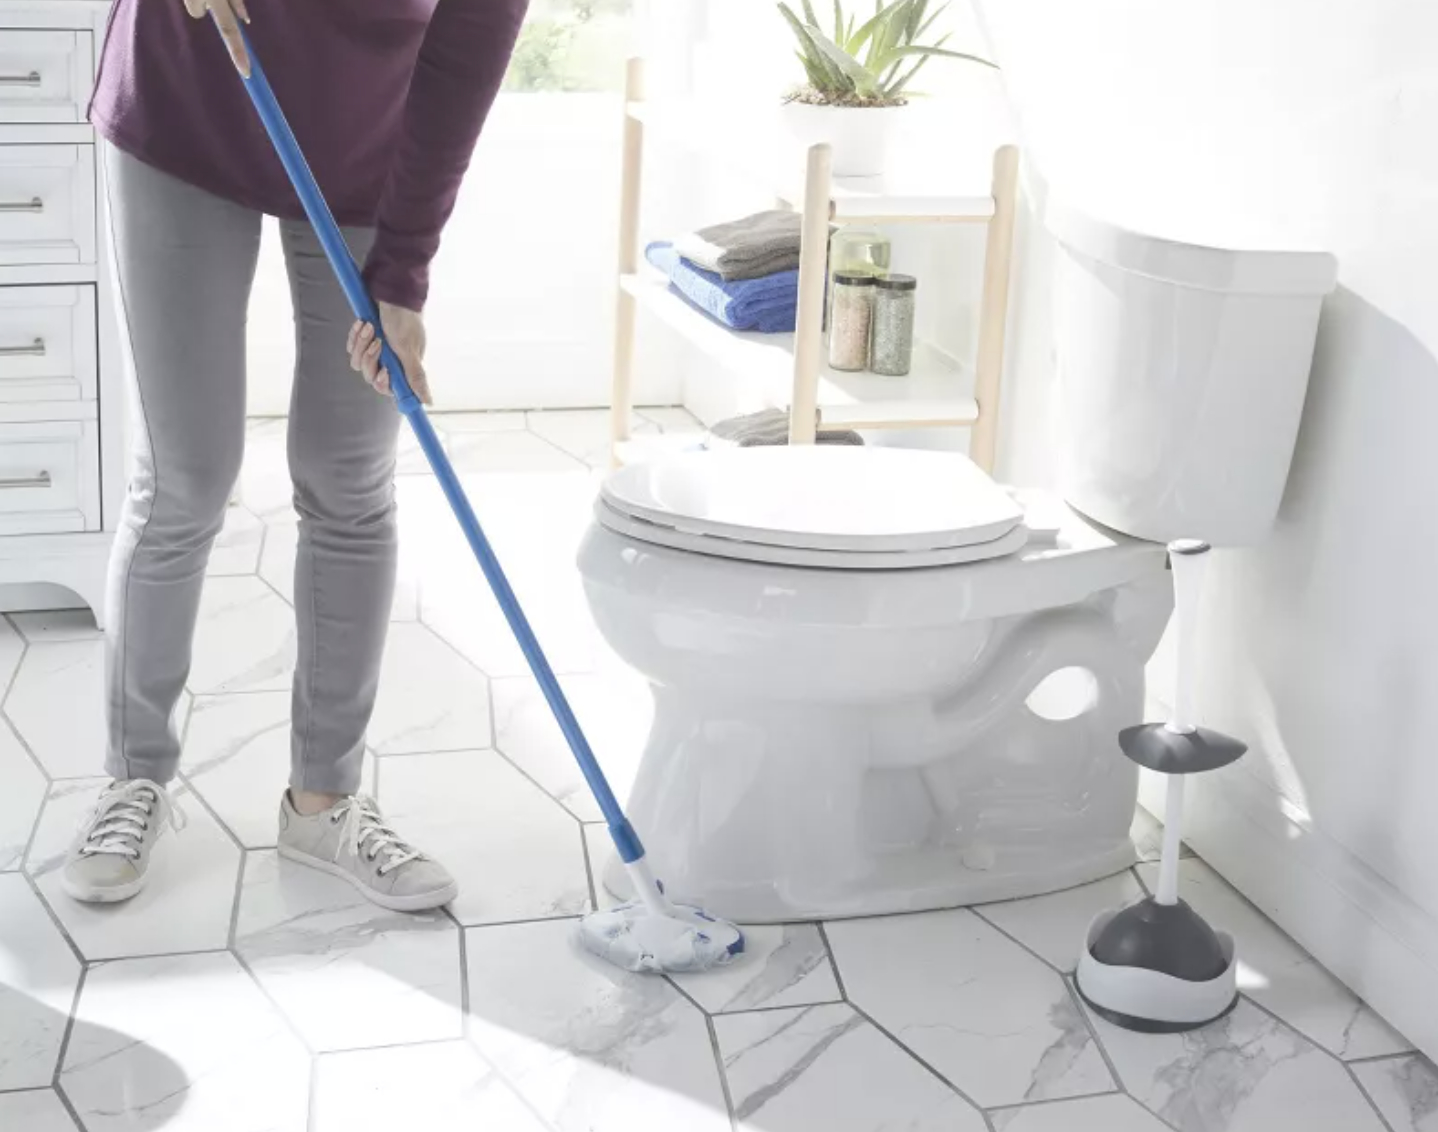 The best tools for keeping the bathroom clean